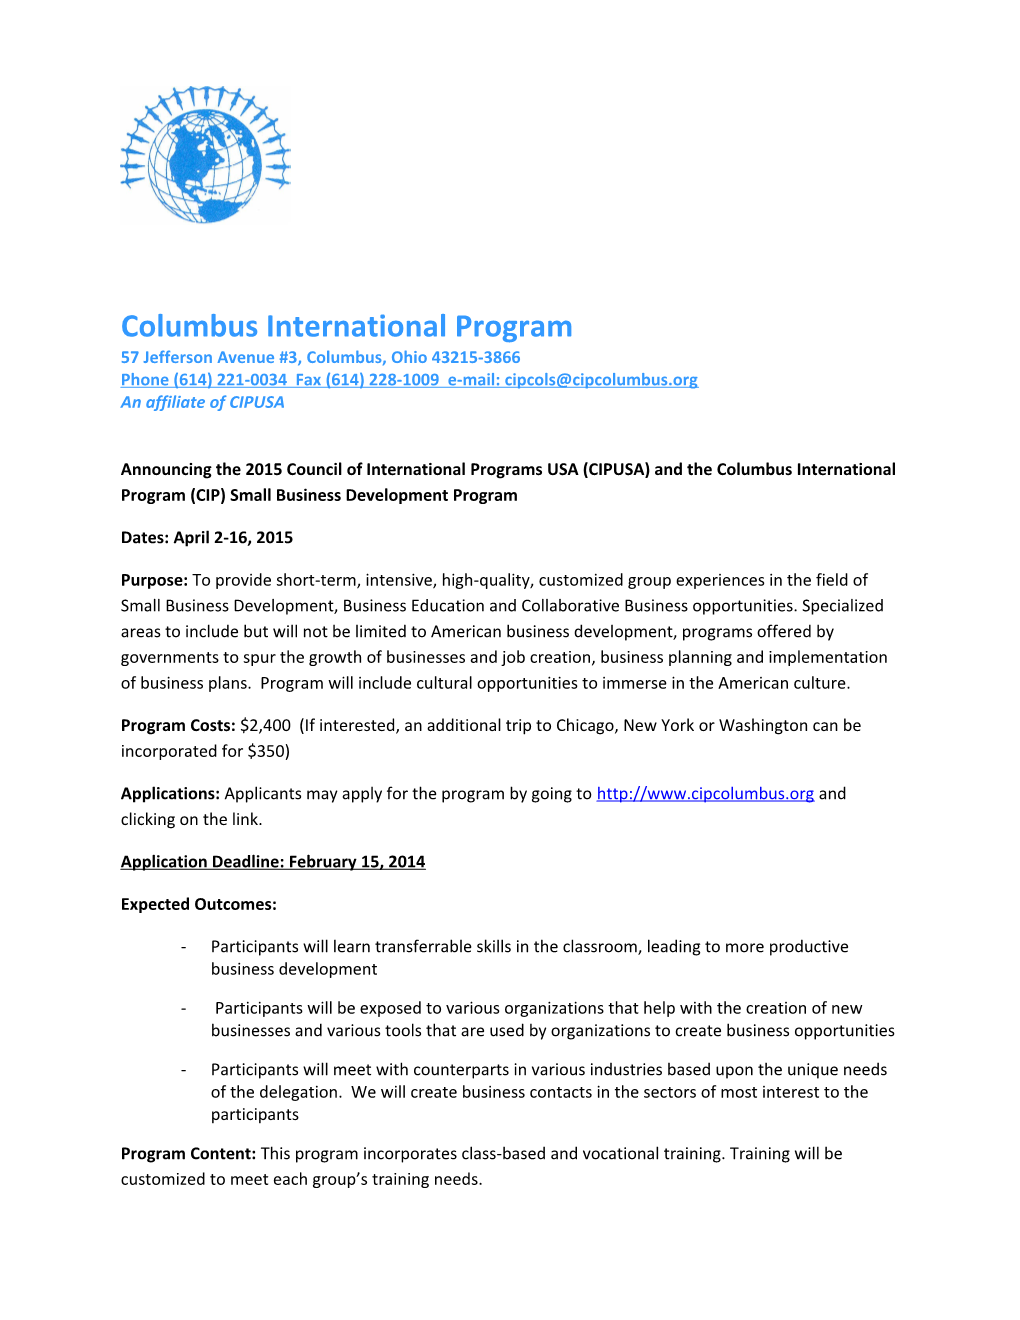 Announcing the 2015 Council of International Programs USA (CIPUSA) and the Columbus